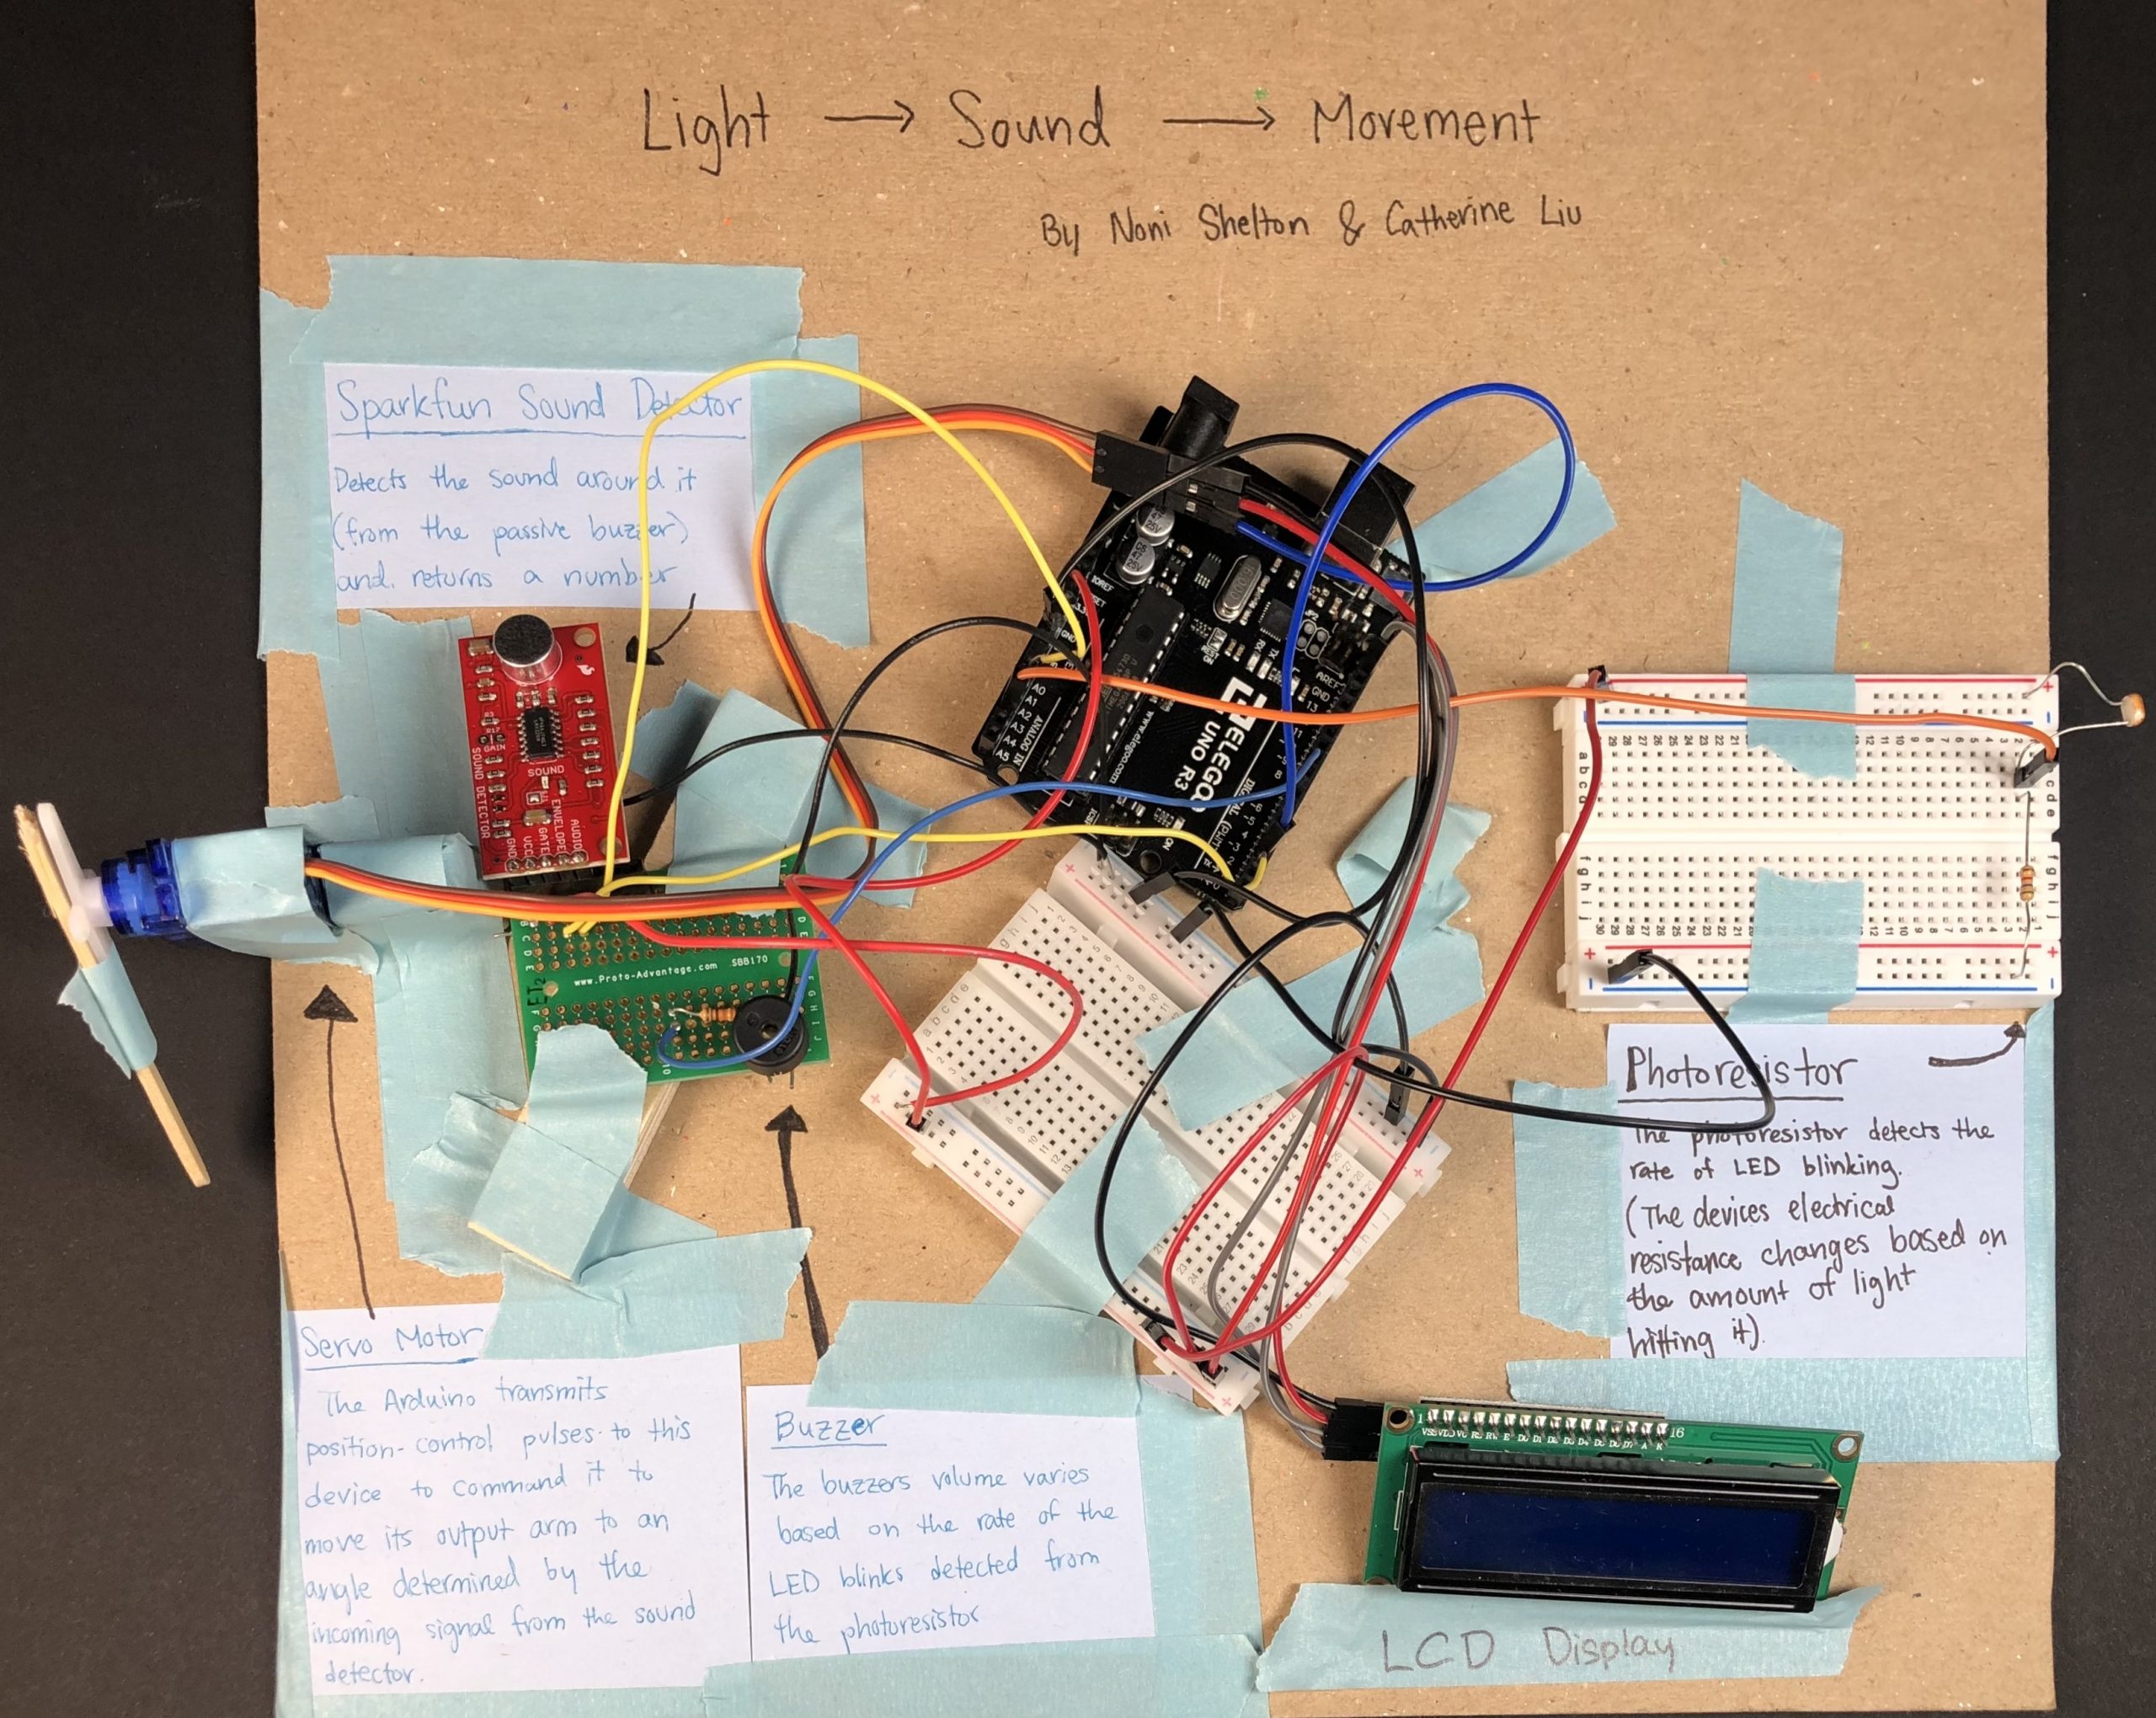 Noni's double transistor: photoresistor to buzzer to sound detector to rotational popsicle stick by a servo motor